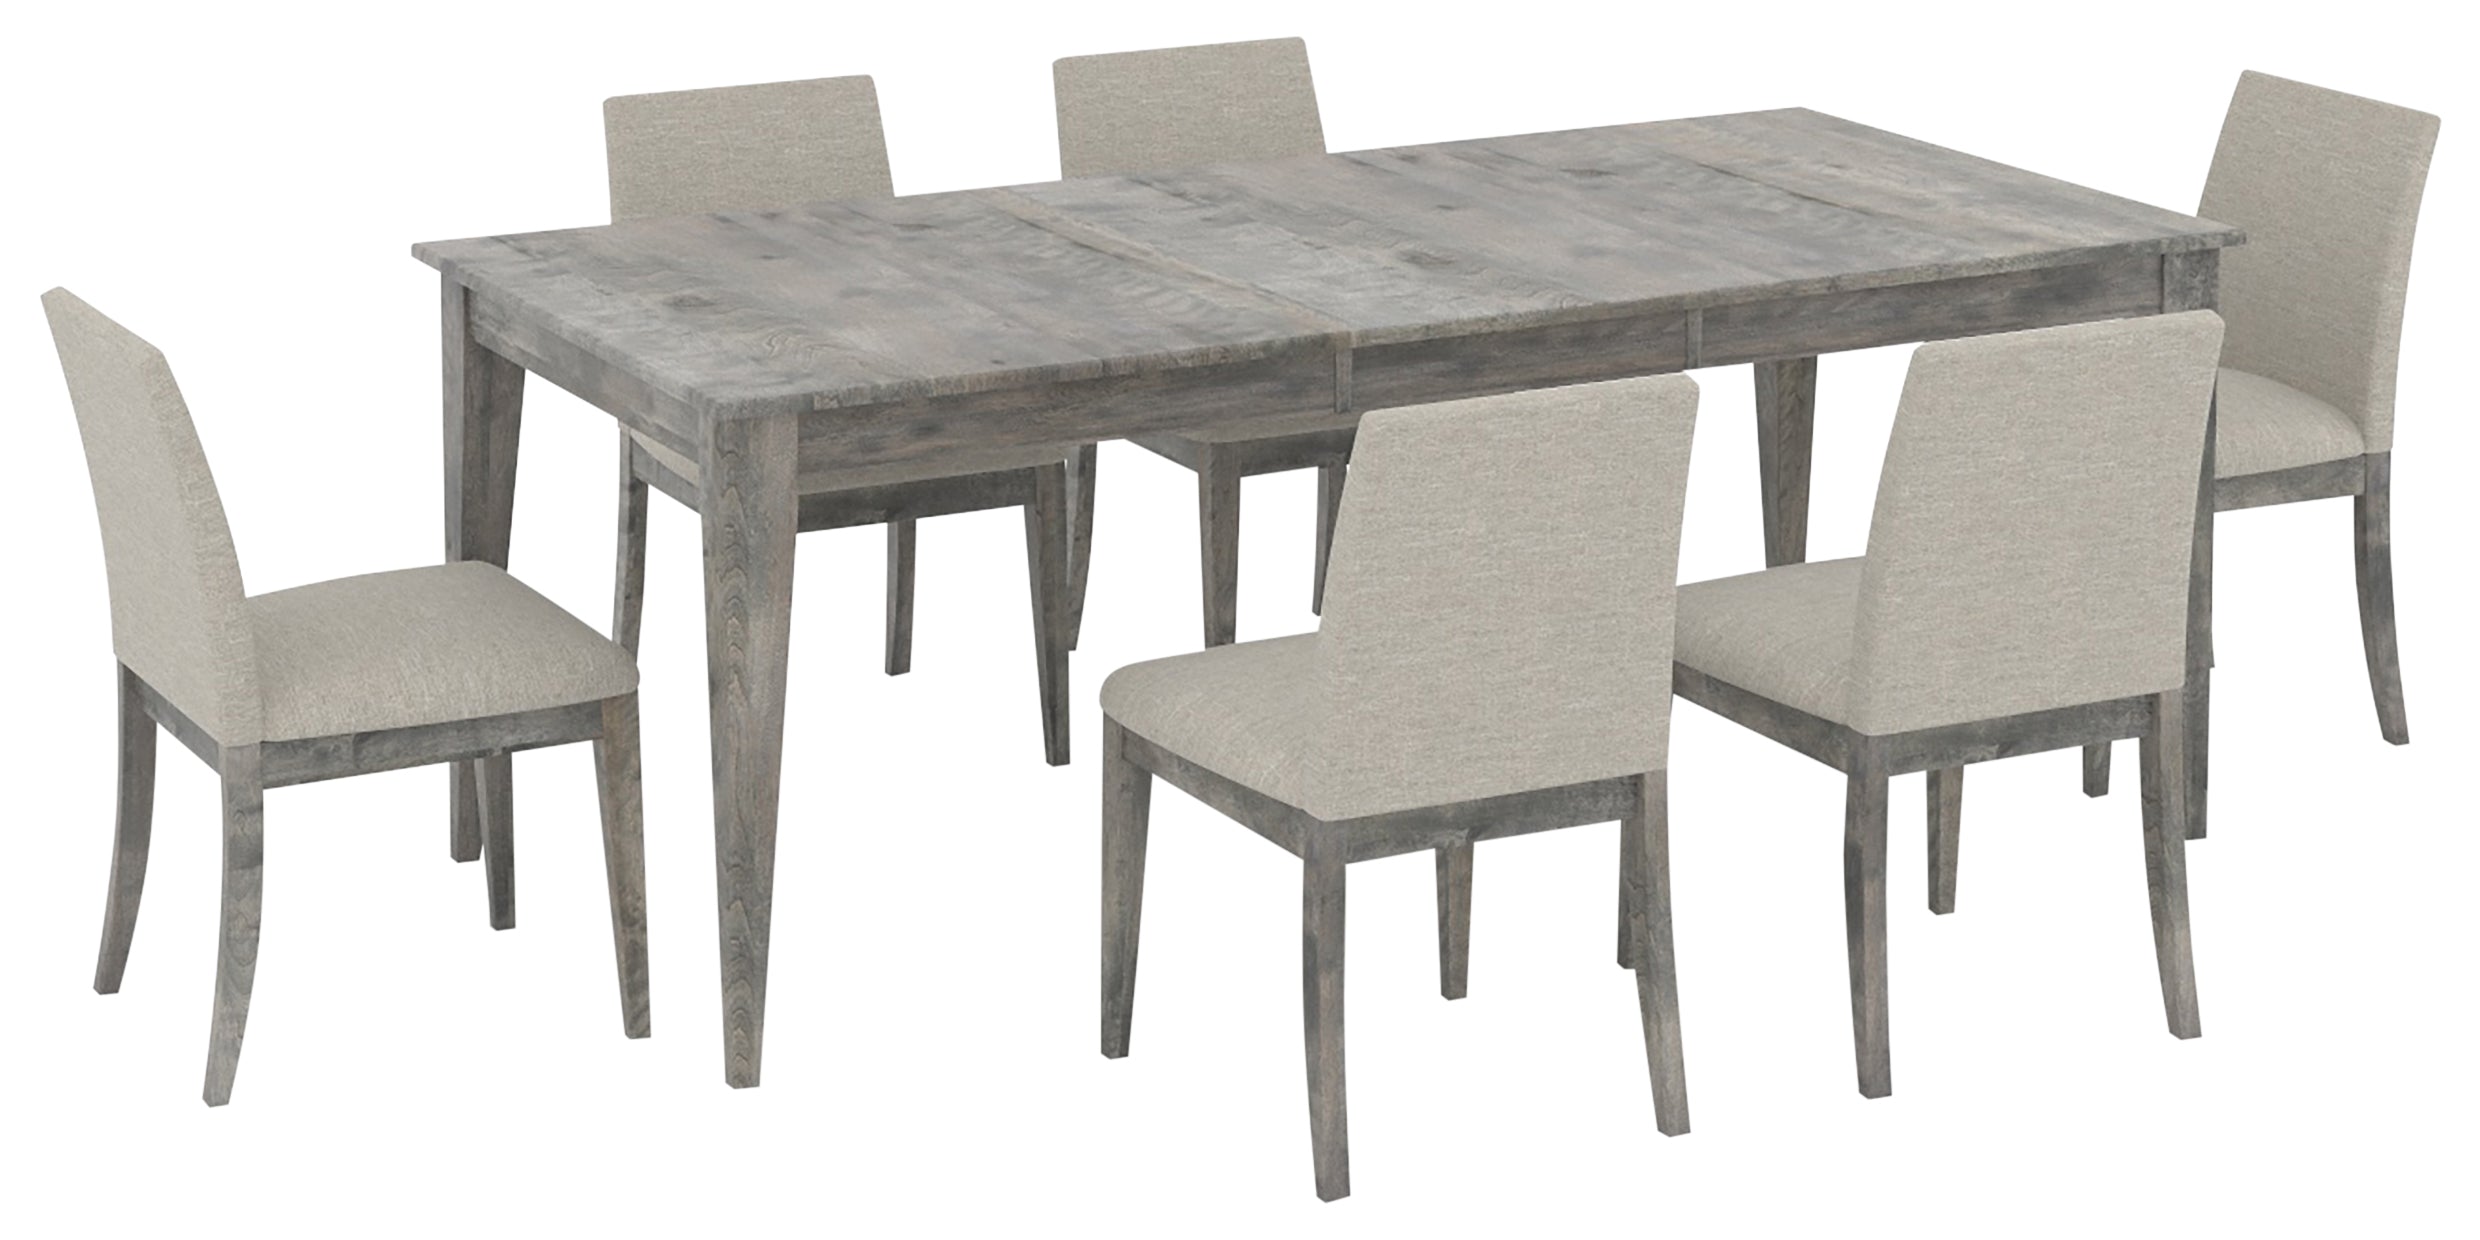 Shadow Birch with Matte Finish and TB Fabric | Canadel Core 3860 Dining Set - Floor Model | Valley Ridge Furniture